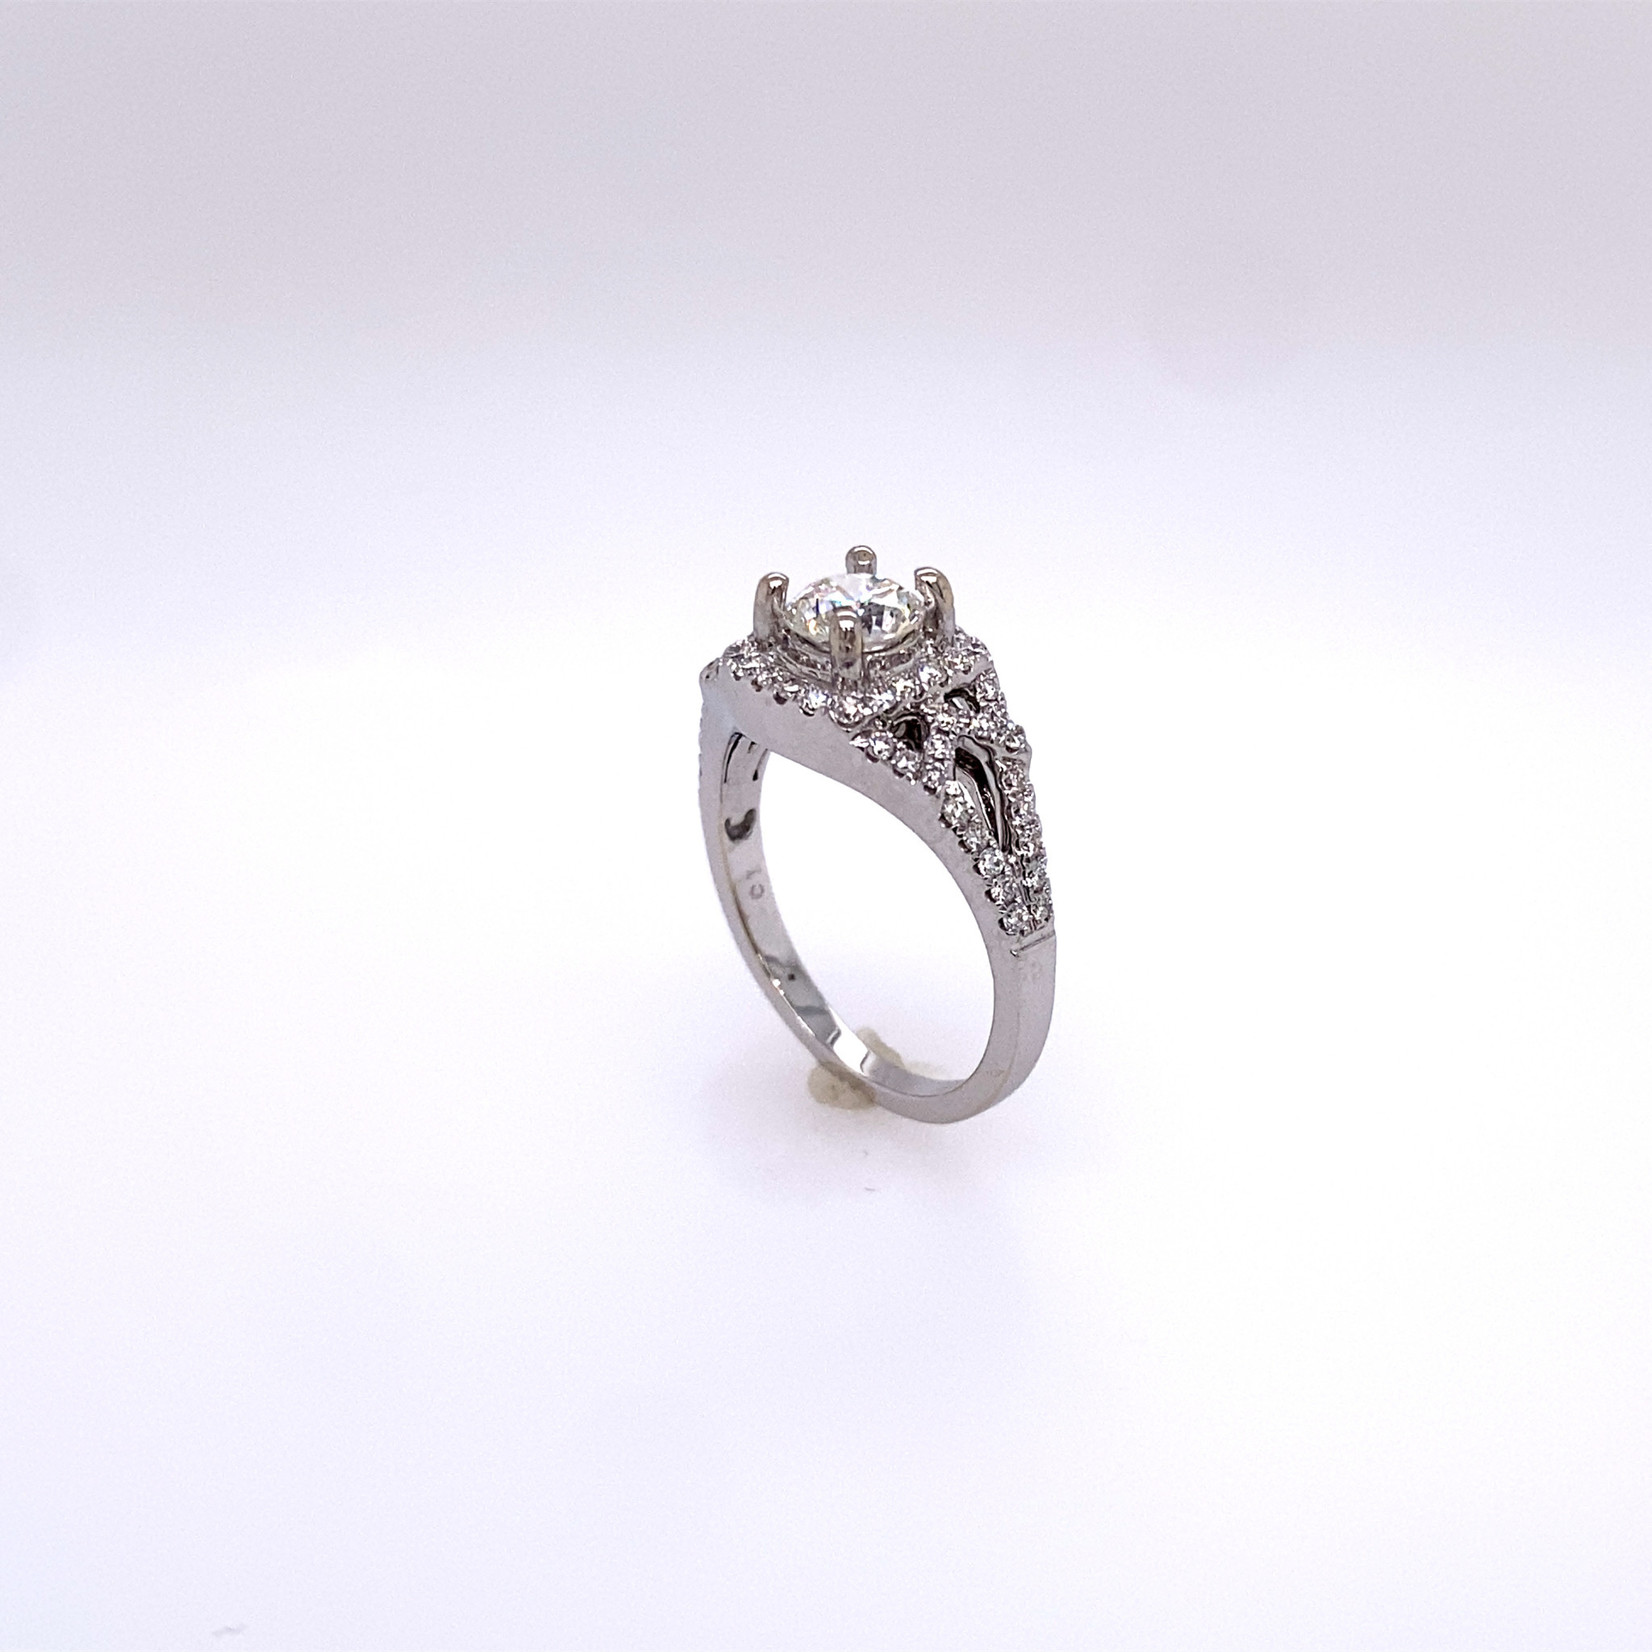 Millenia 14k White Gold Square Halo Engagement Ring